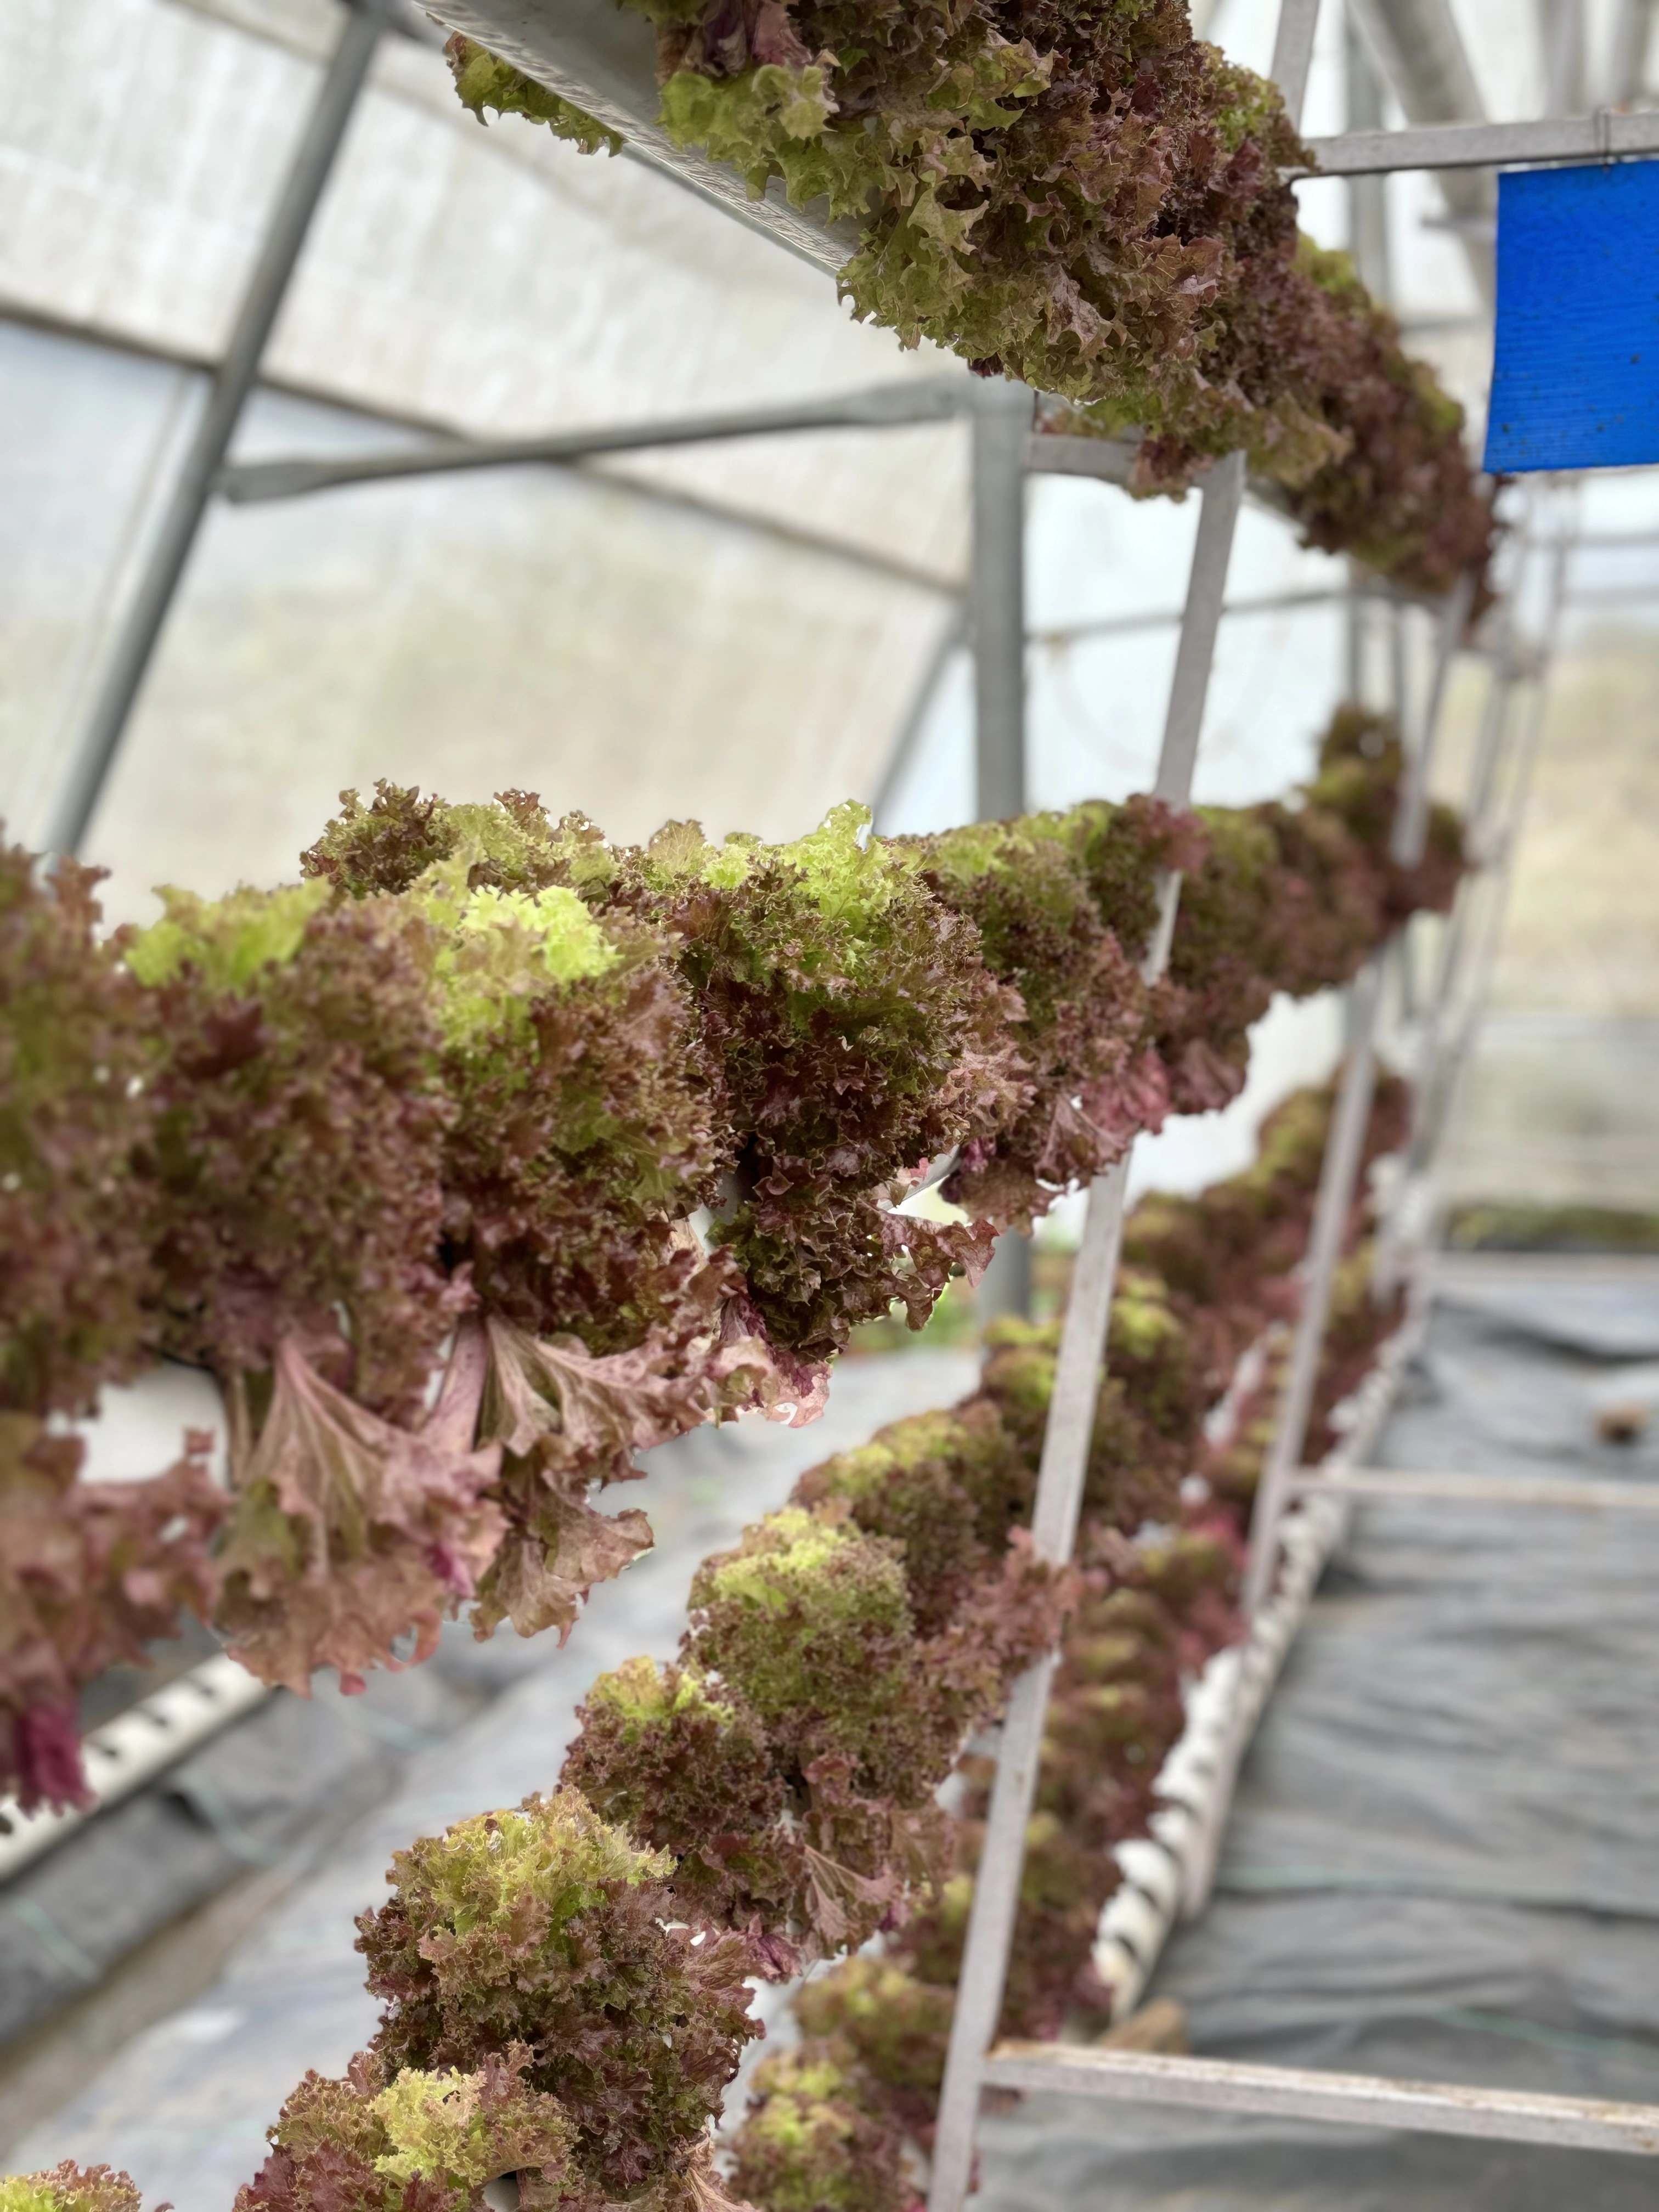 Hydroponic Red Lolo lettuce-1